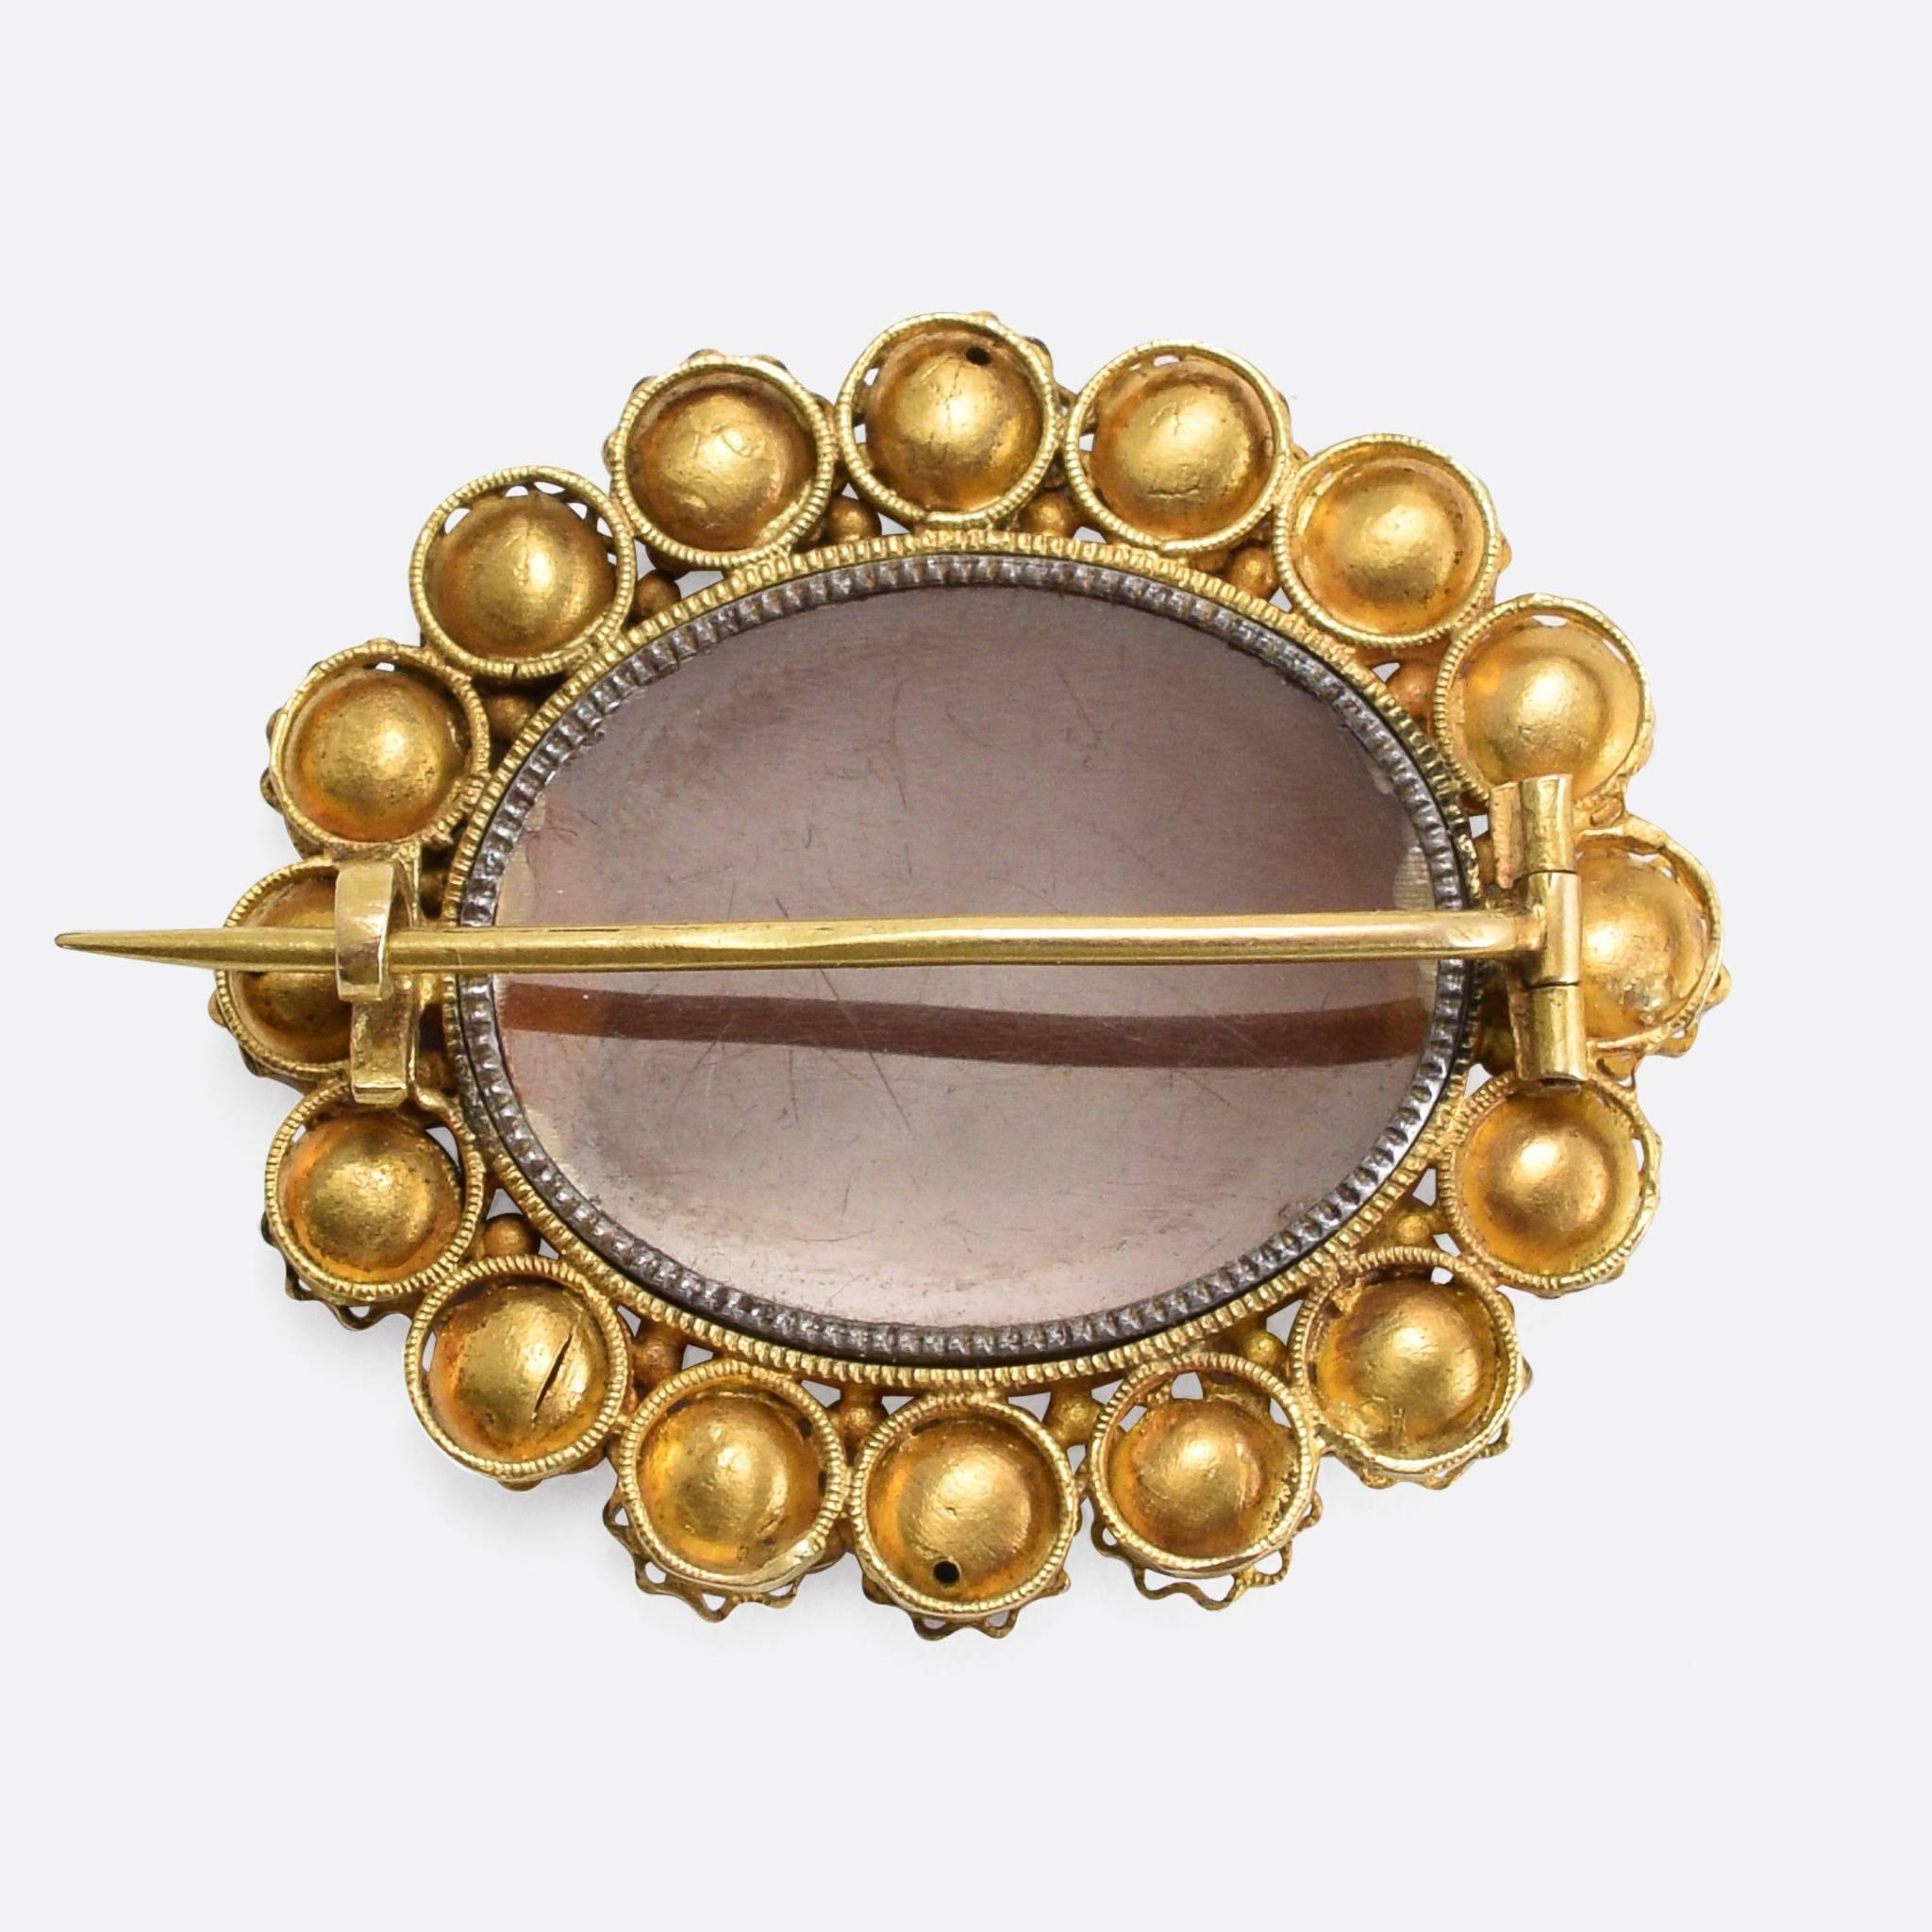 This brooch blew me away when I first saw it... There's just so much about it... The harlequin gemstones, the regency period filigree goldwork, the cameo - of course!